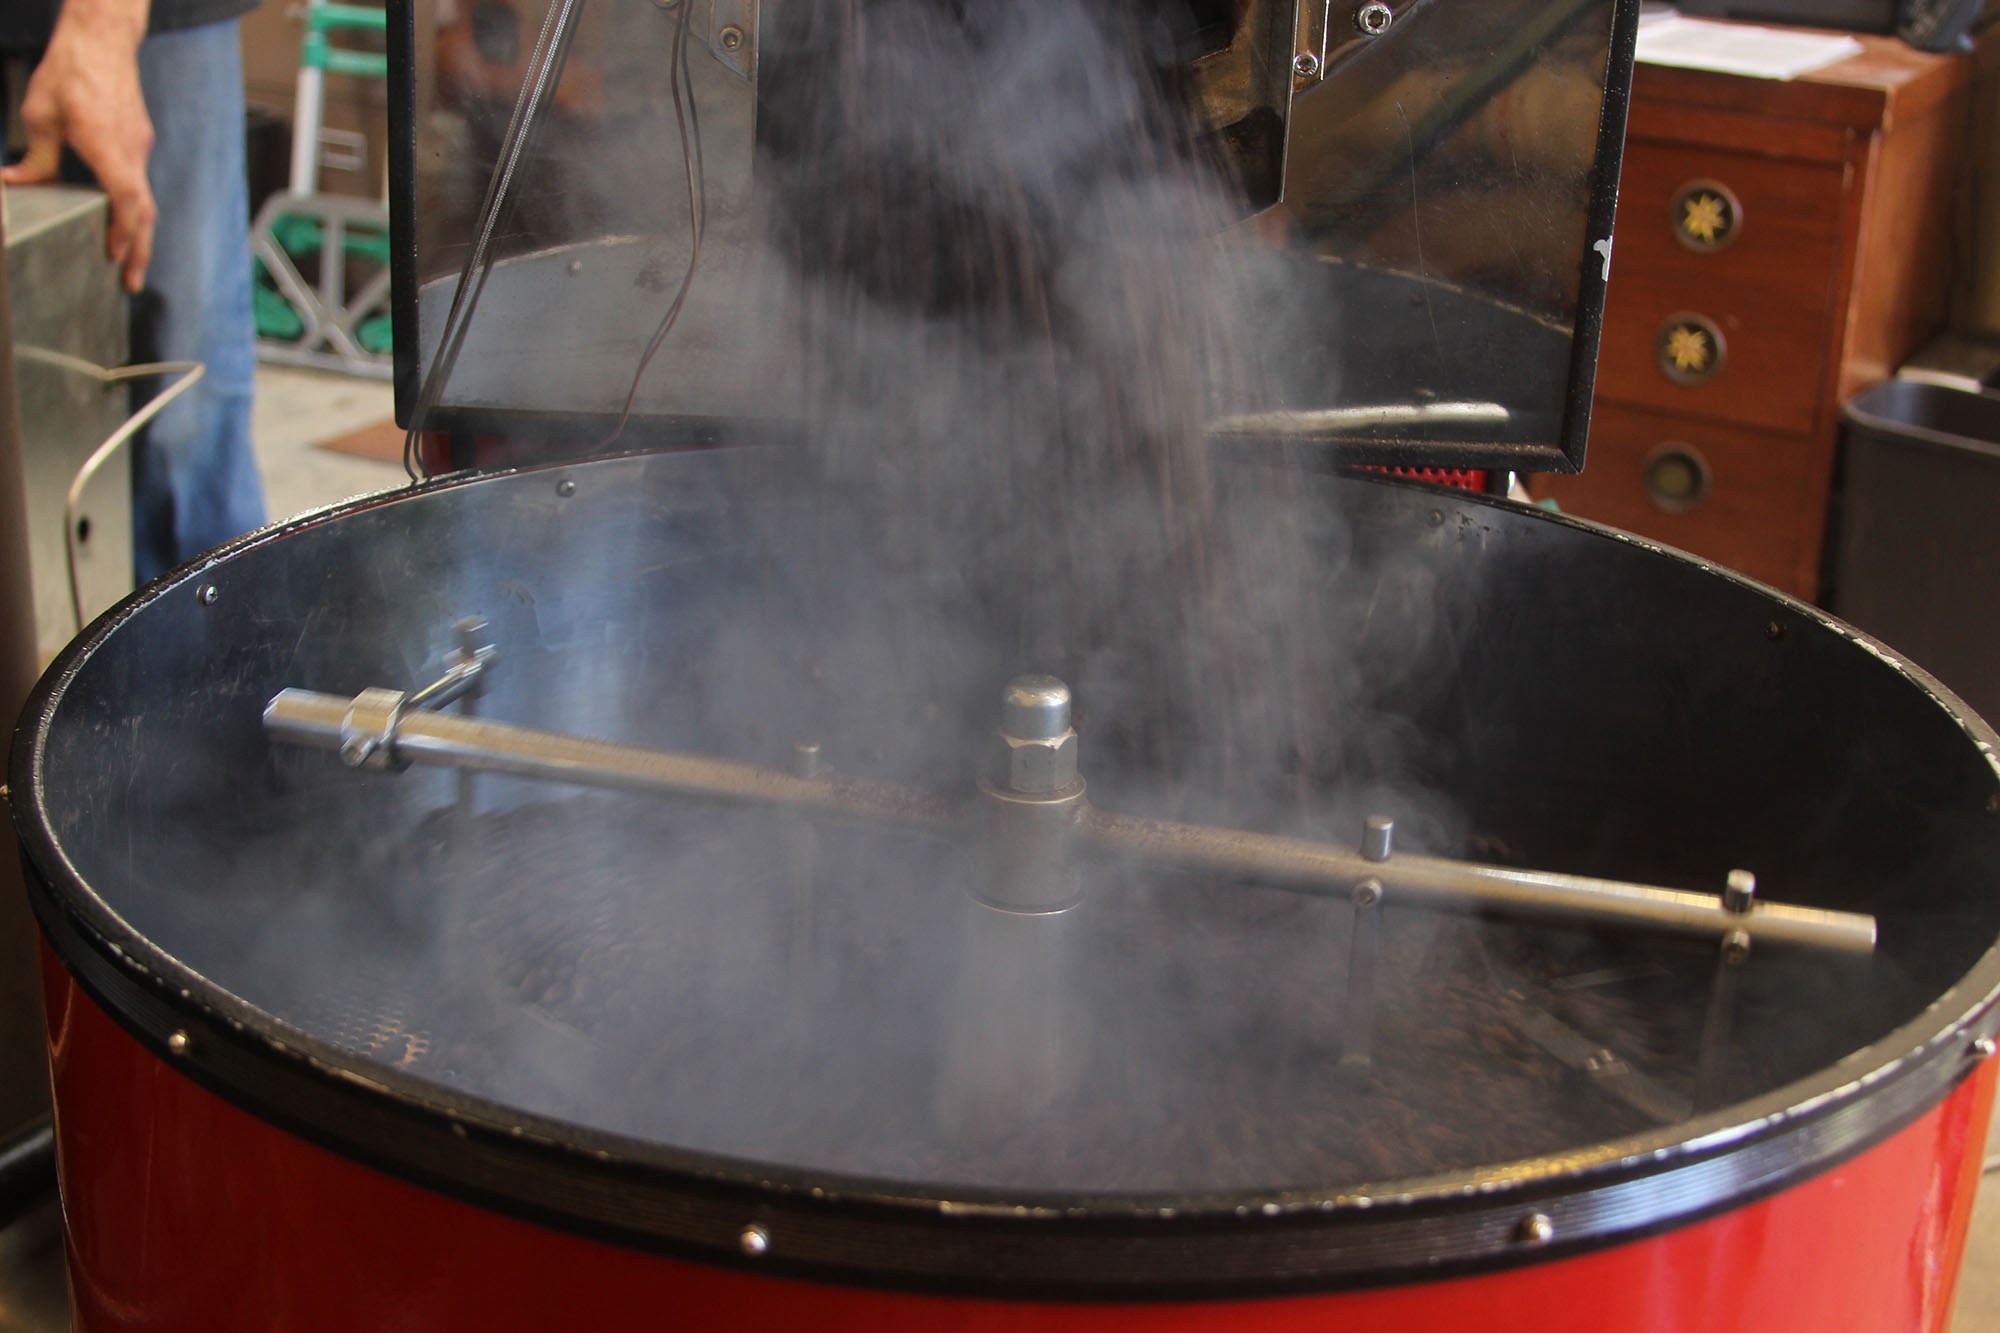 Steam coming off the full turning bin as the fresh-roasted beans begin to cool.